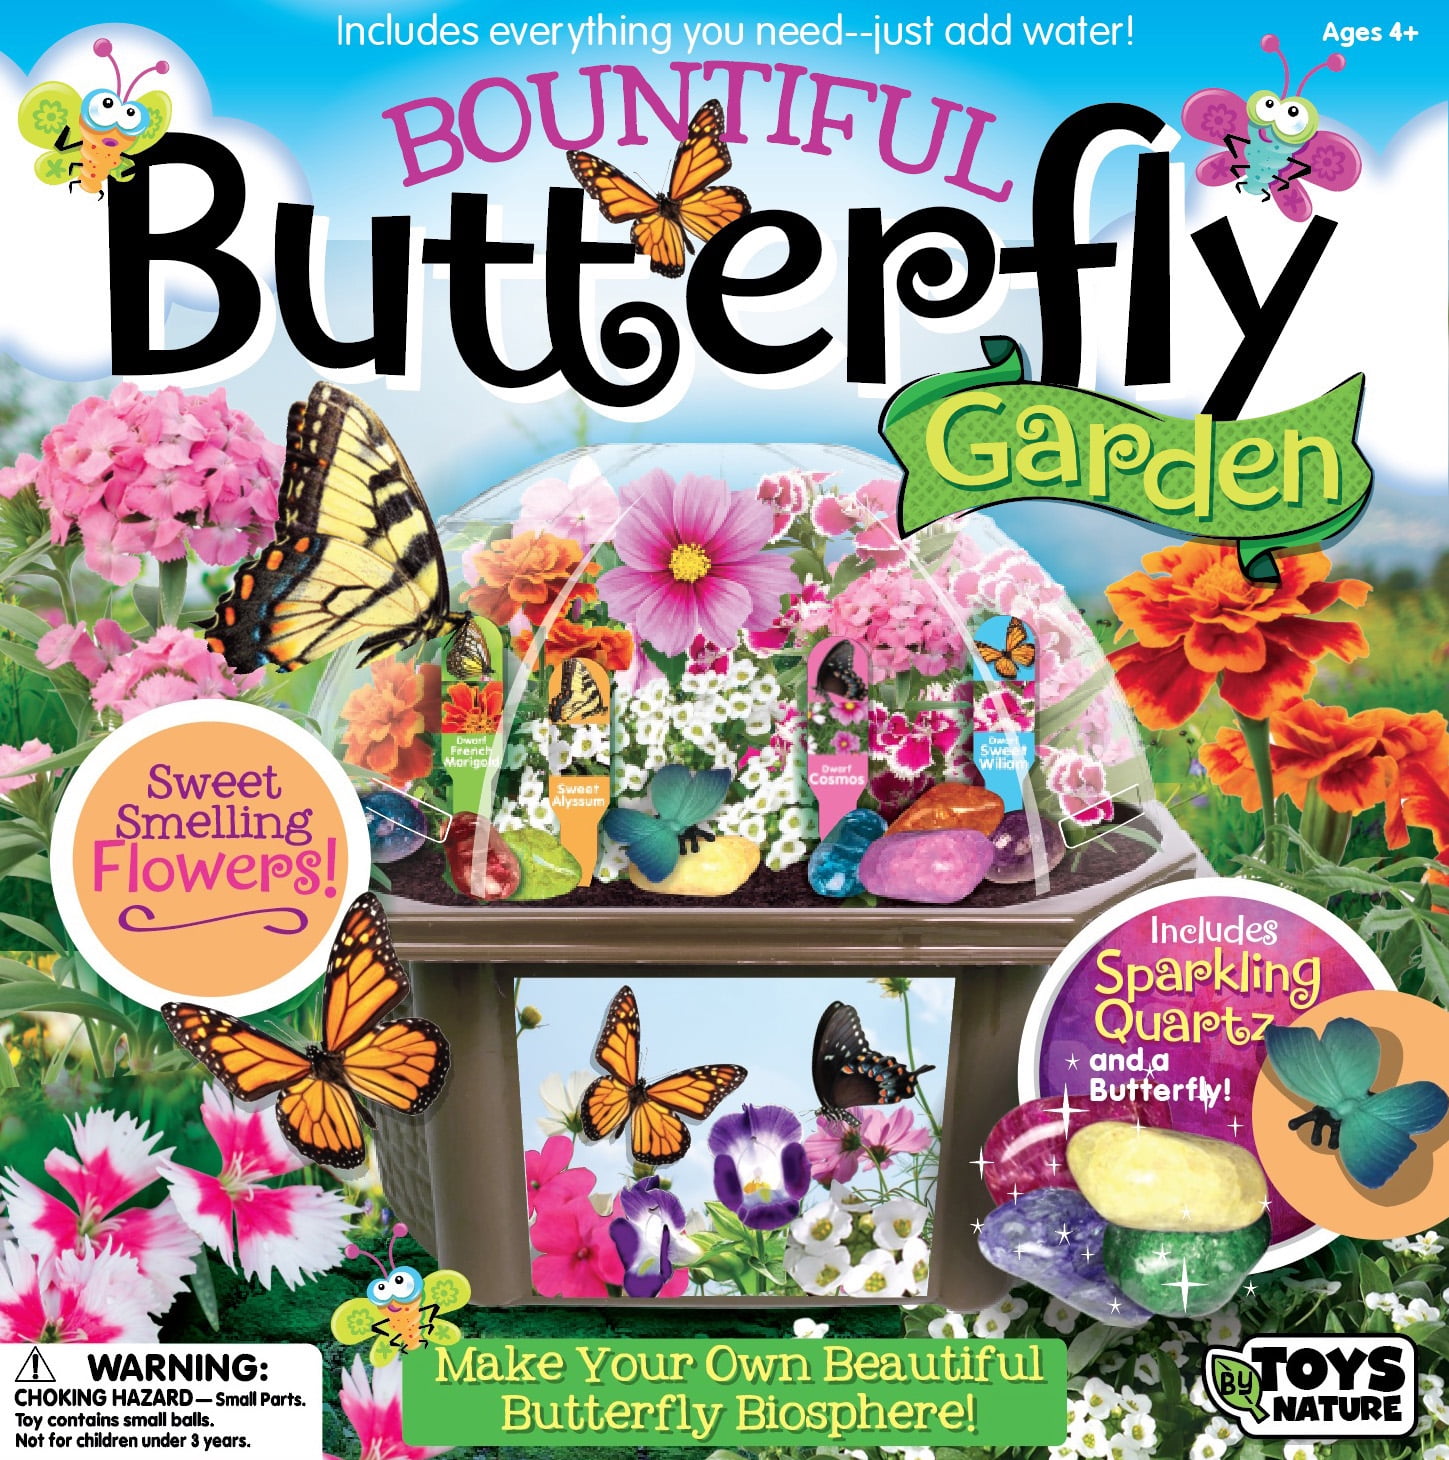 Toys By Nature - Bountiful Butterfly Garden - Indoor Micro-Gardening Kit